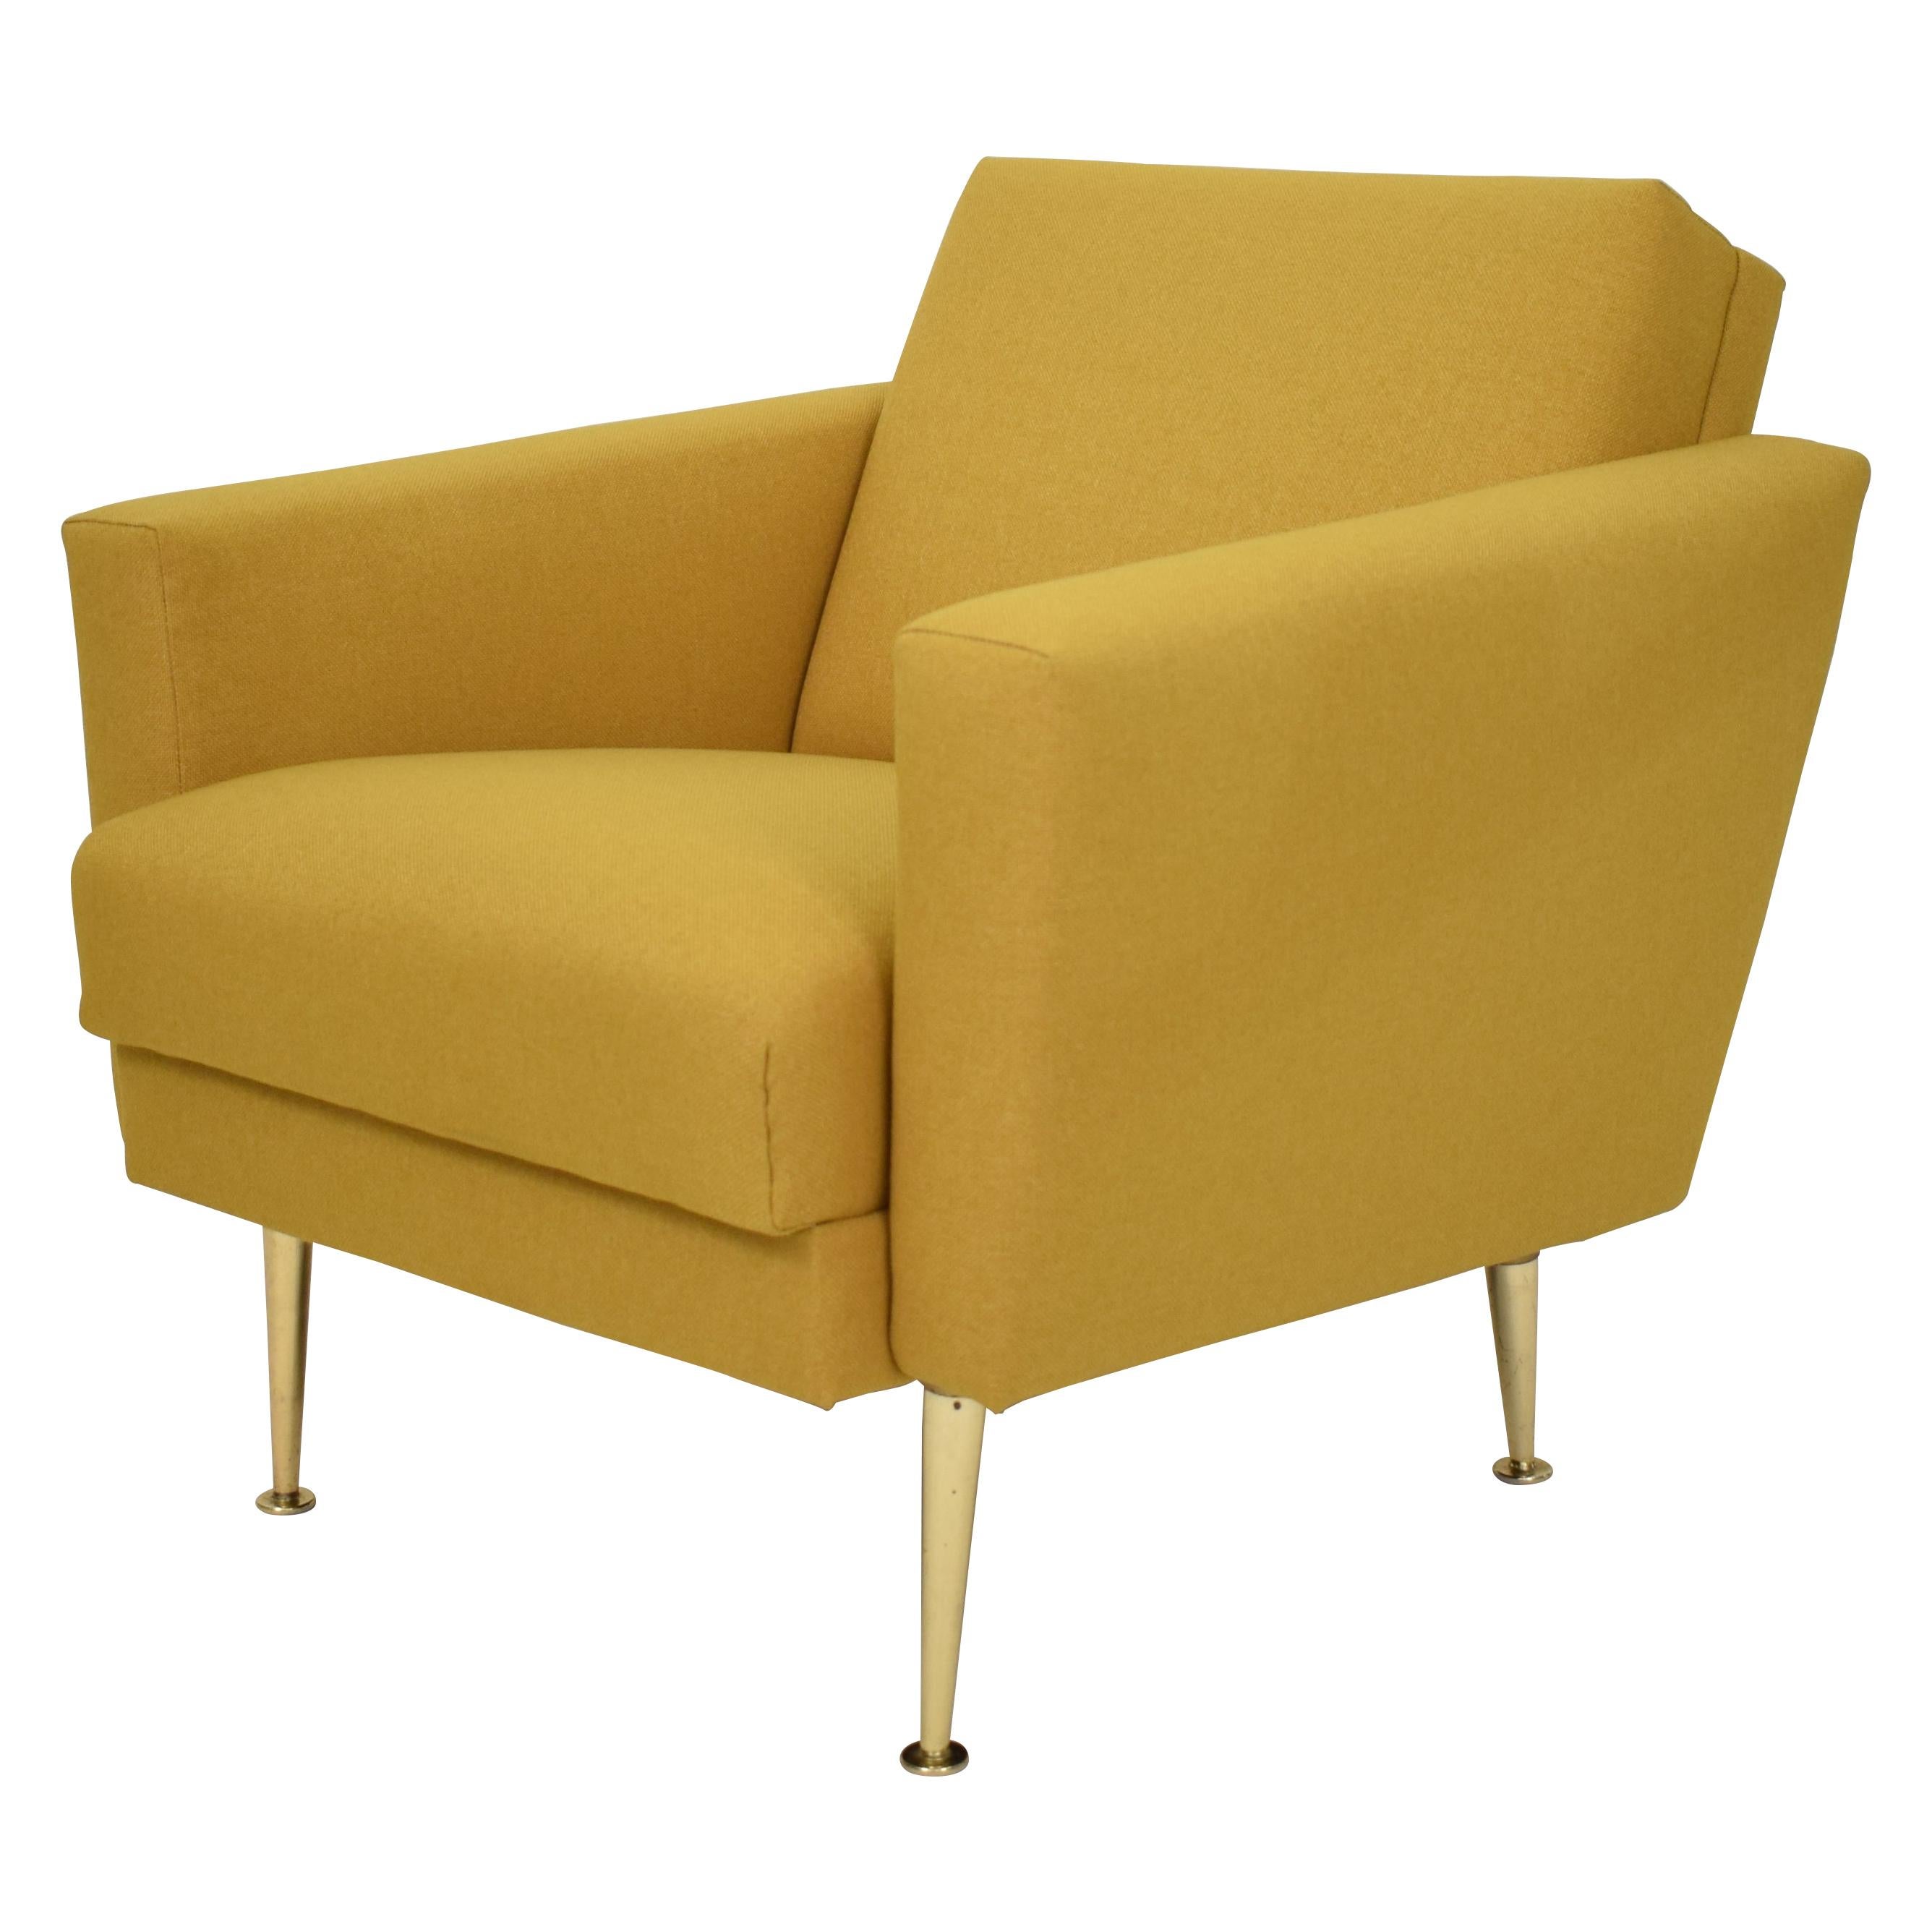 Midcentury German Yellow and Brass Lounge Chair Armchair Pierre Guariche Style